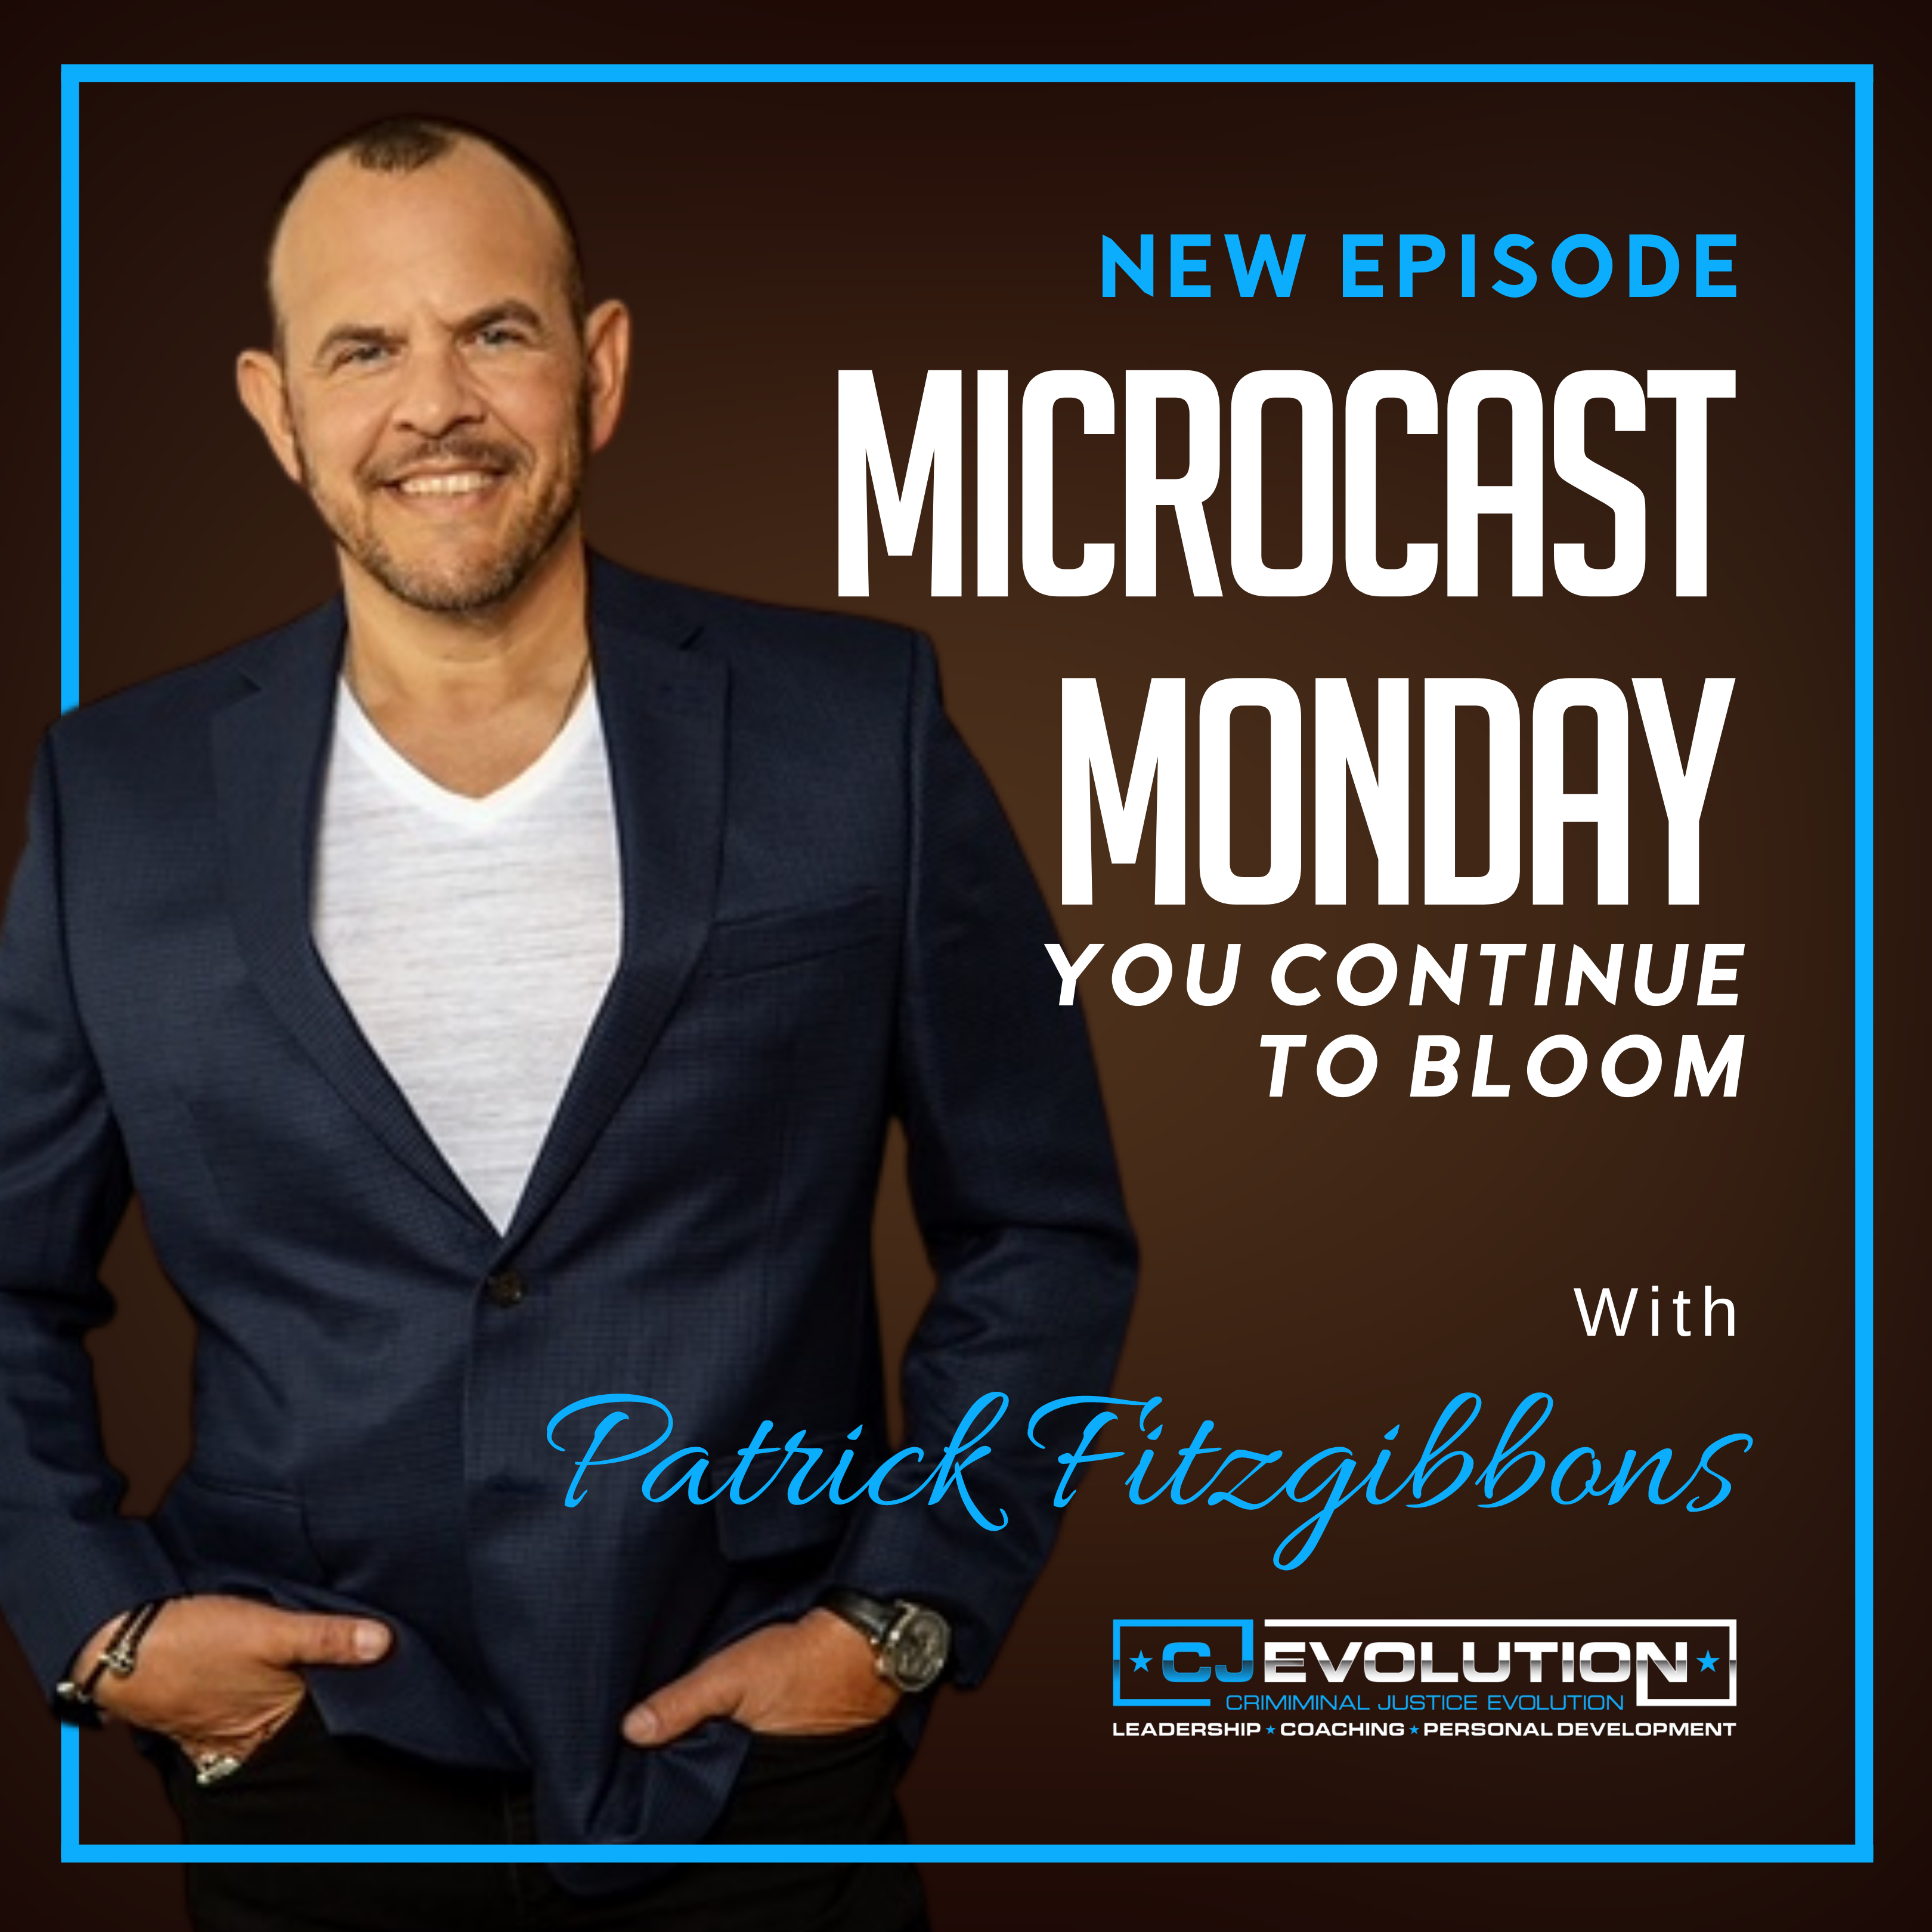 Microcast Monday #134 – You Continue to Bloom